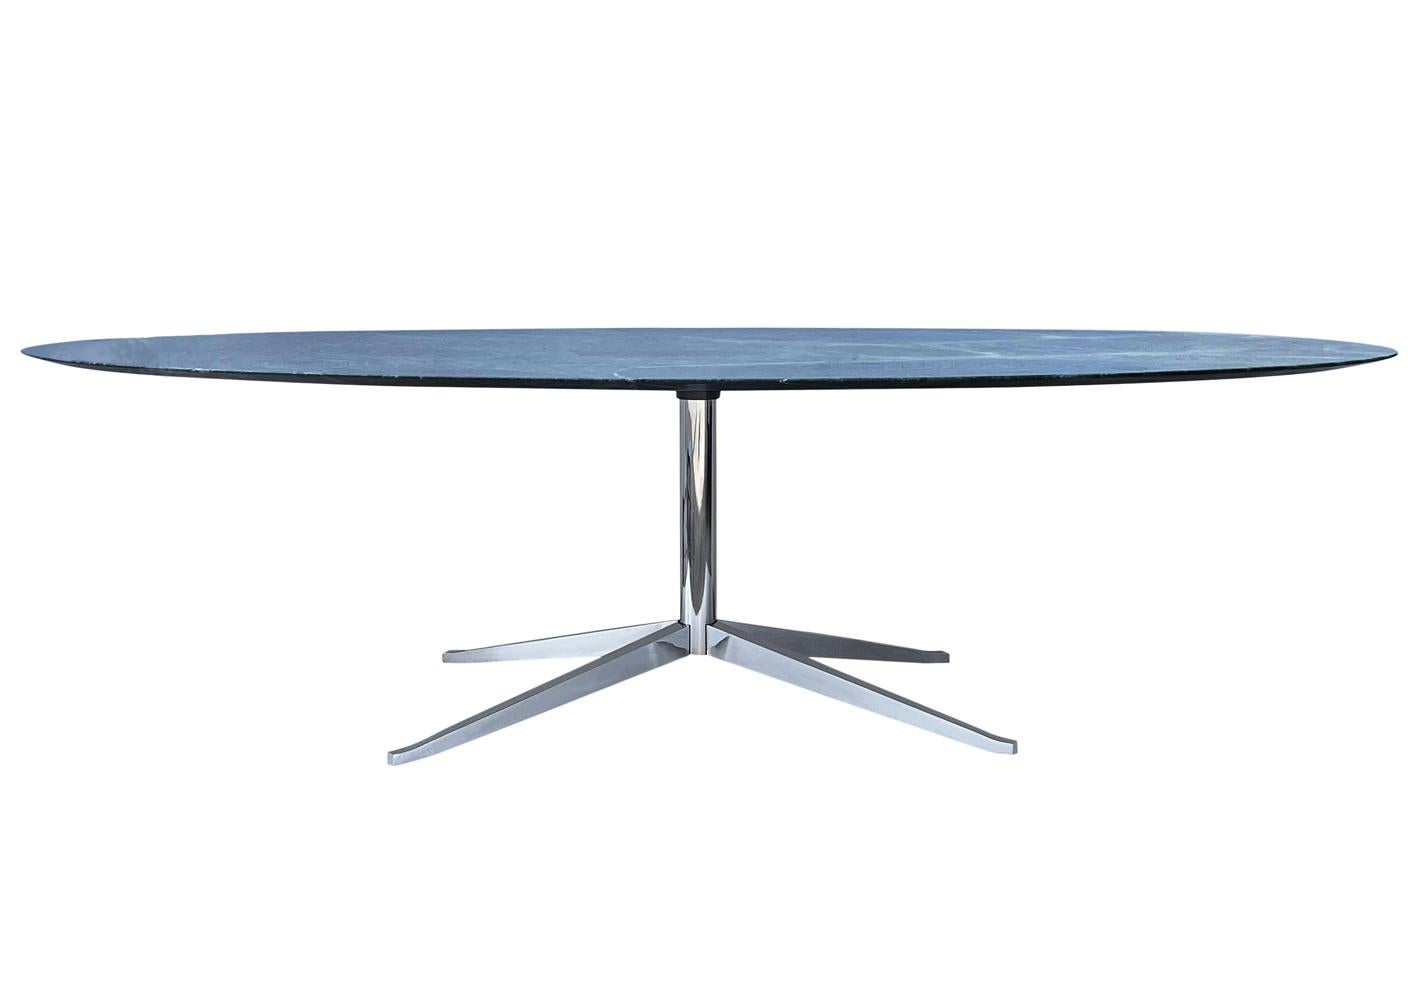 An elegant executive table designed by Florence Knoll and produced by Knoll. It features a beautiful high gloss Verde Green marble top and a chrome-plated star base. This was one of the most expensive marble options for this table. Signed twice with